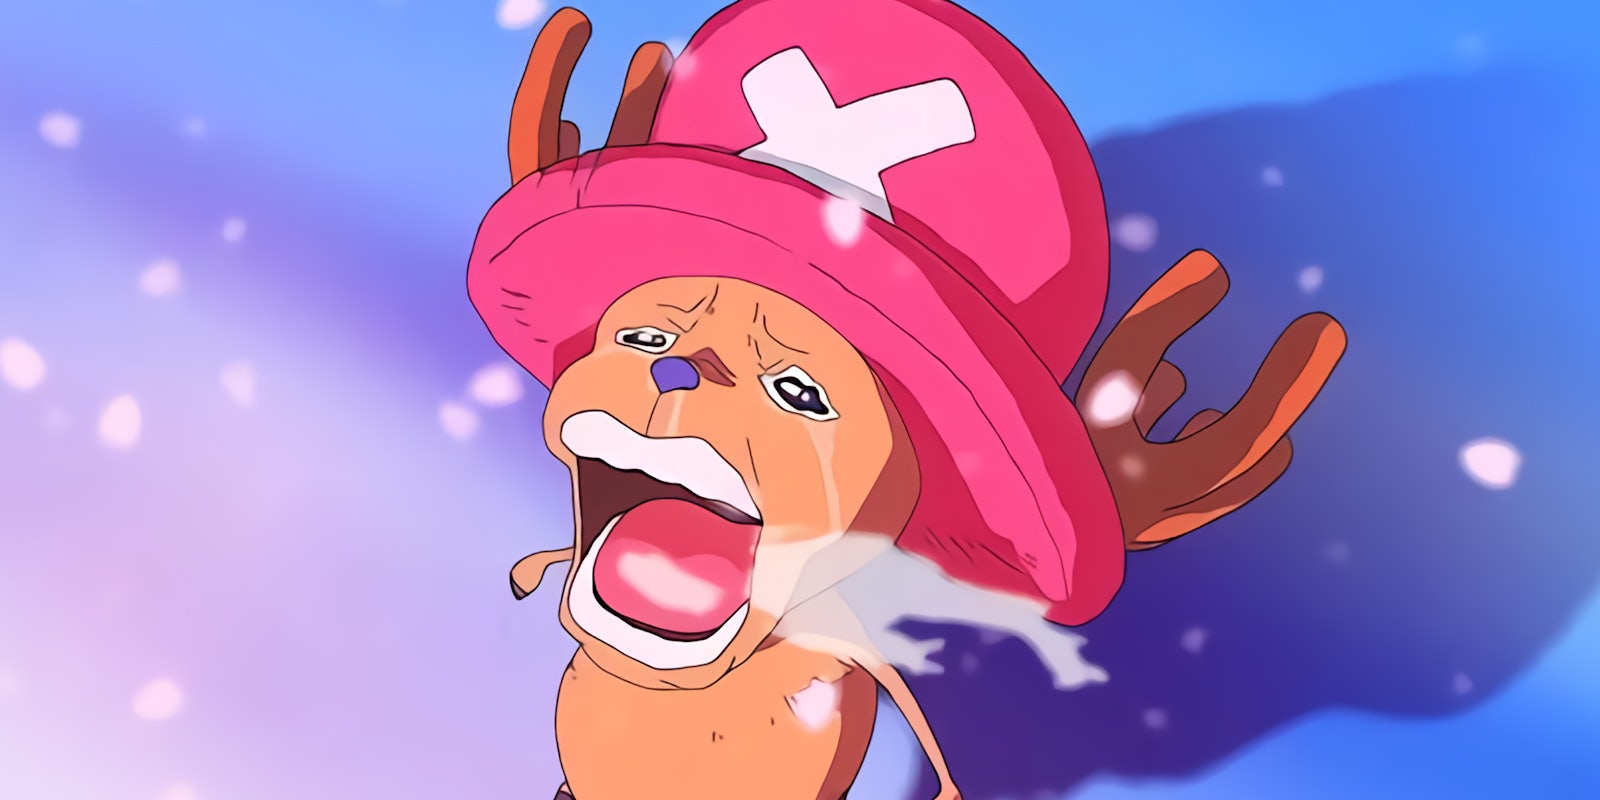 Chopper Crying meme from One Piece